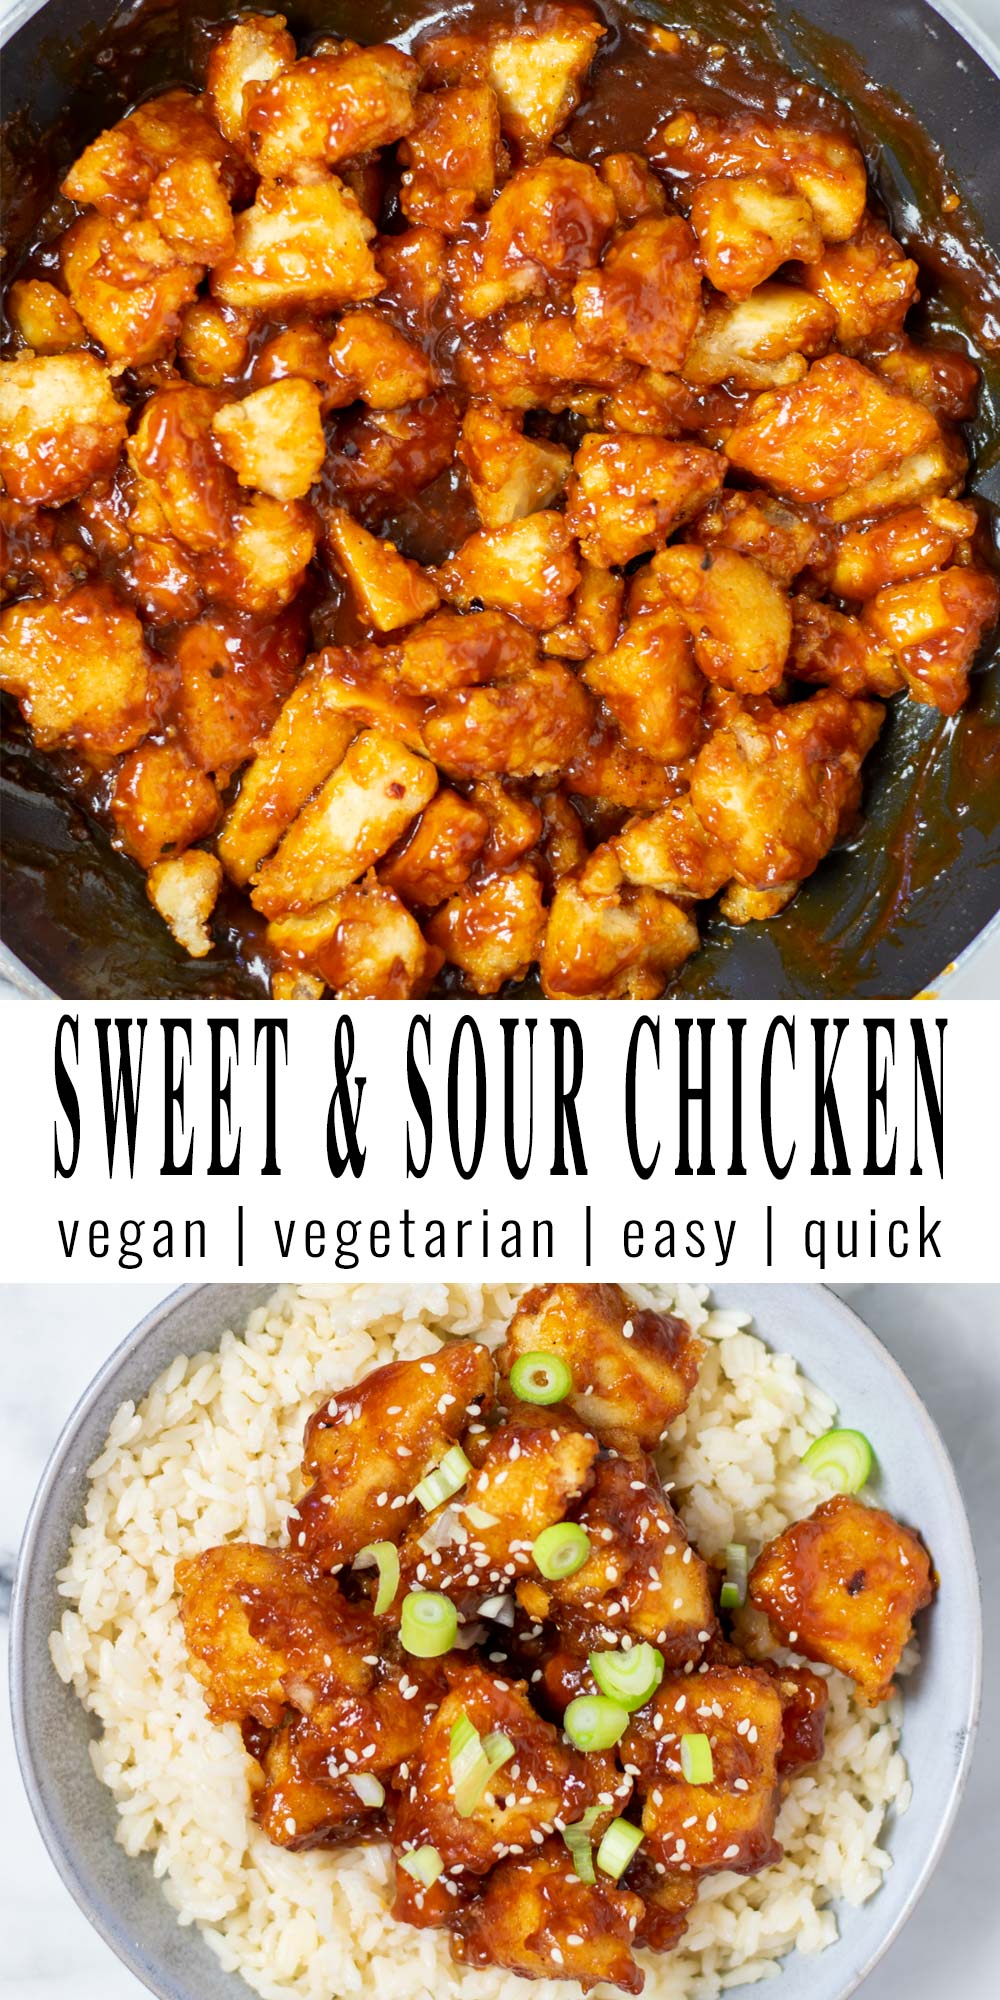 Collage of two pictures of the Sweet and Sour Chicken with recipe title text.